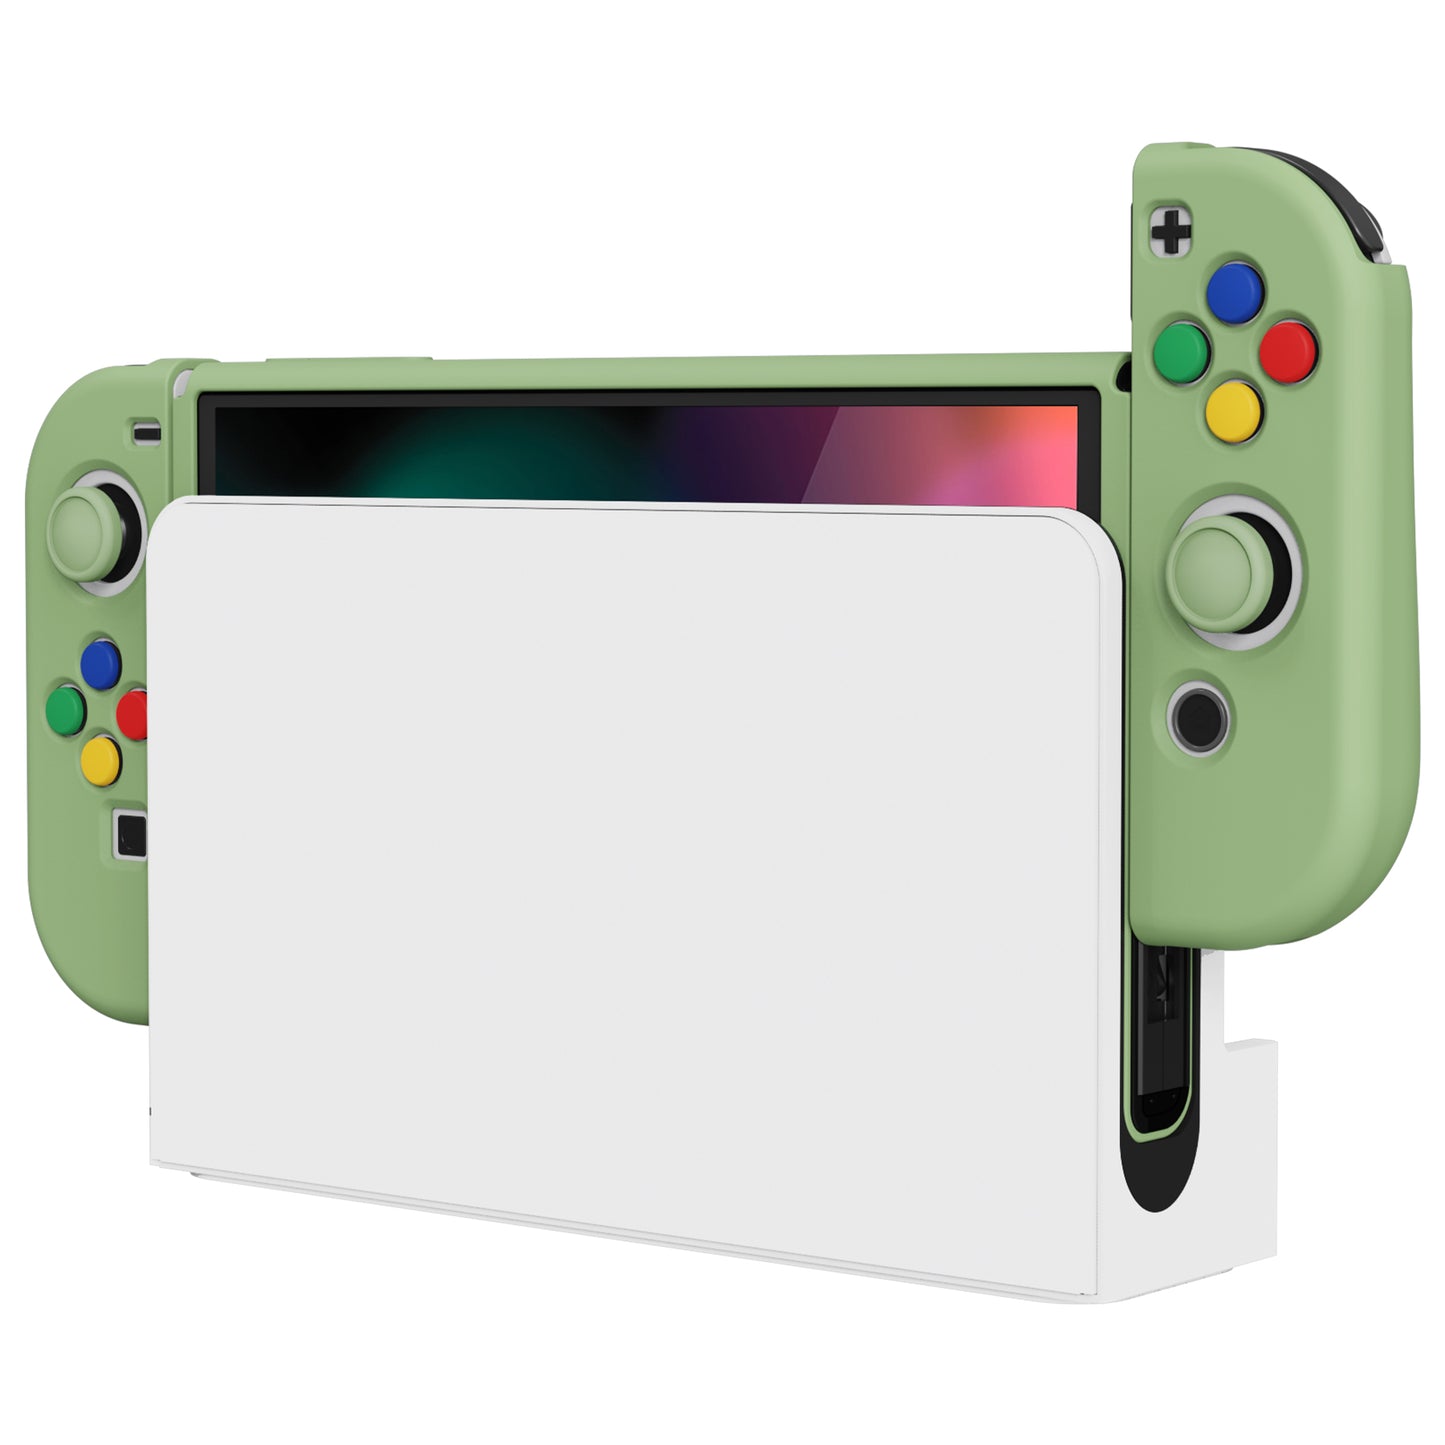 PlayVital ZealProtect Soft Protective Case for Switch OLED, Flexible Protector Joycon Grip Cover for Switch OLED with Thumb Grip Caps & ABXY Direction Button Caps - Matcha Green - XSOYM5006 playvital